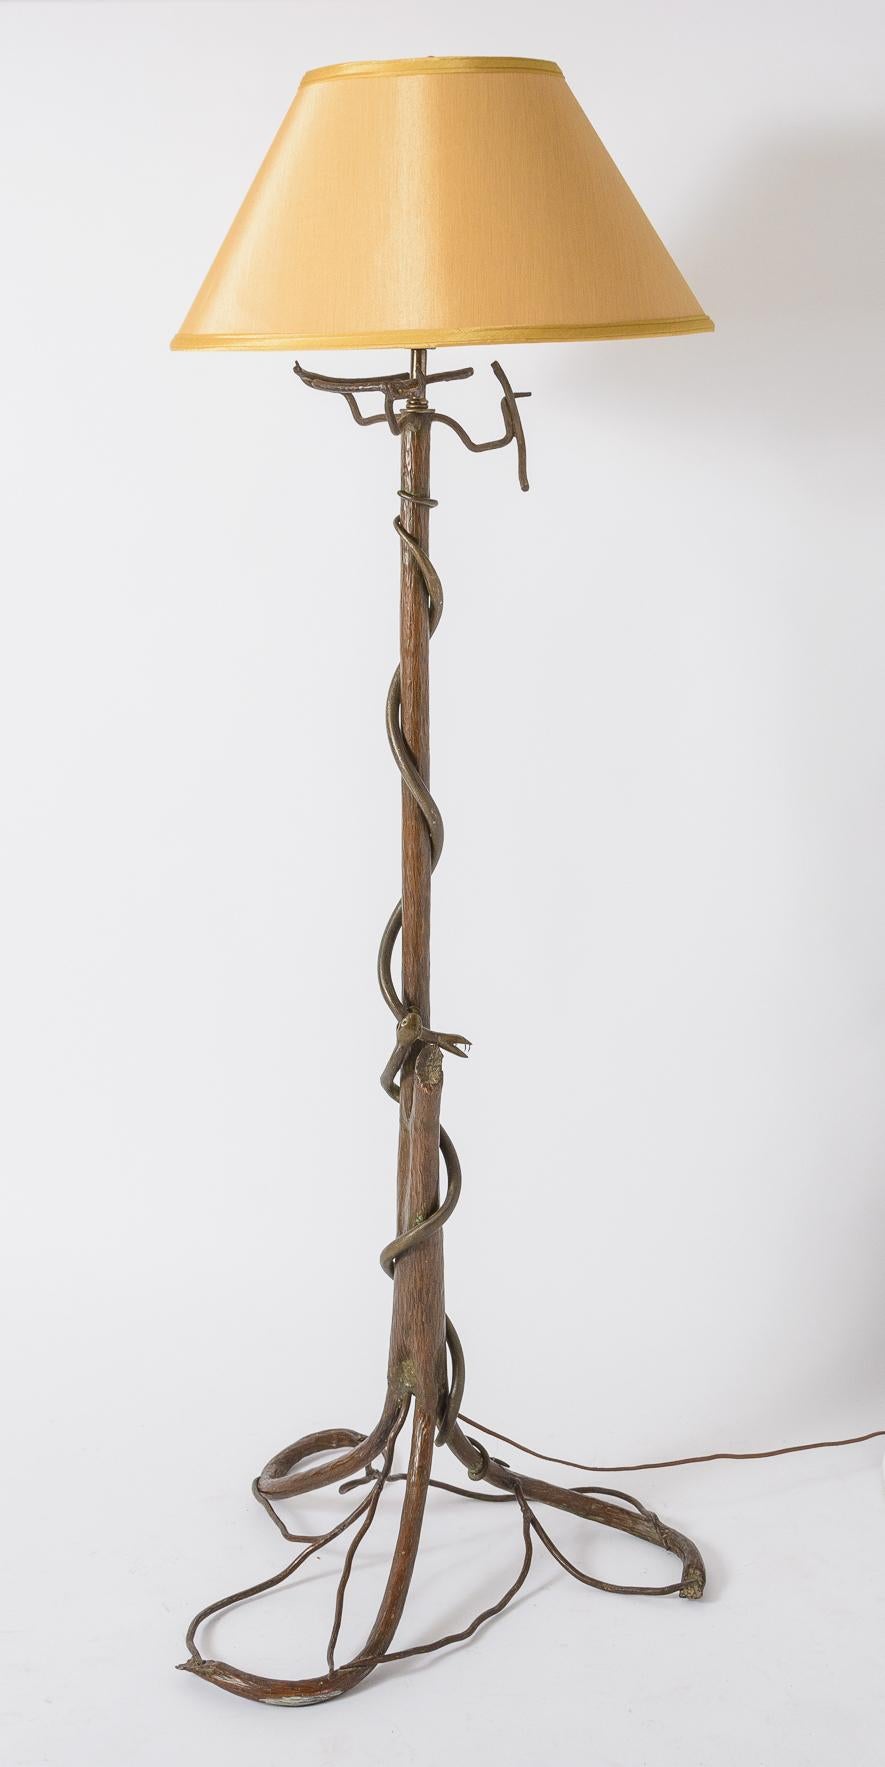 A whimsical floor lamp.
Beautiful original bronzed surface
Crisp details
Possibly retailed by Donghia